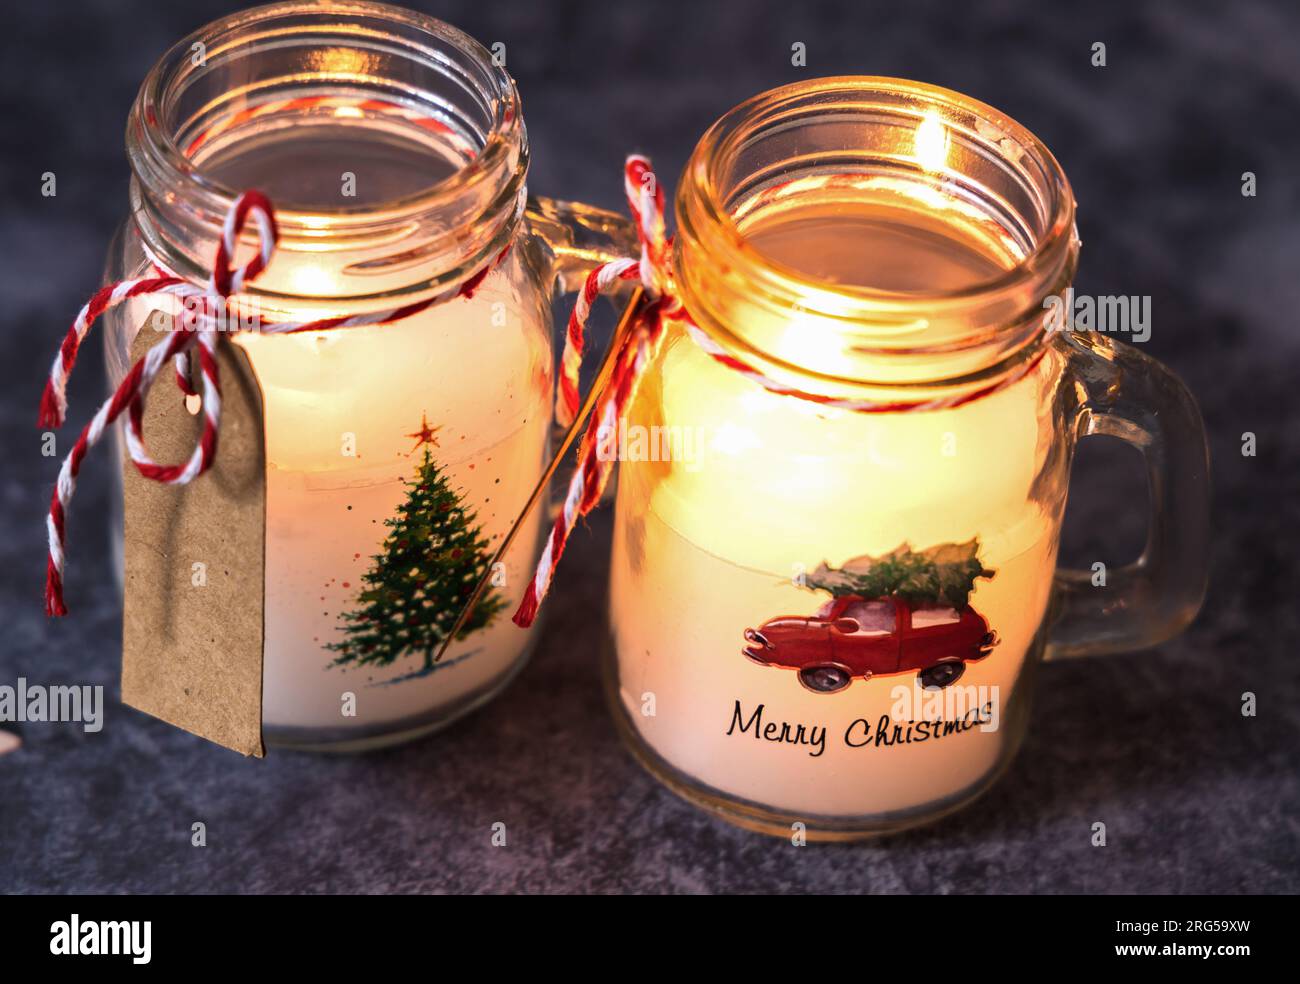 Christmas candles of white paraffin in a glass, decorated with a car and a Christmas tree on a gray background. Stock Photo